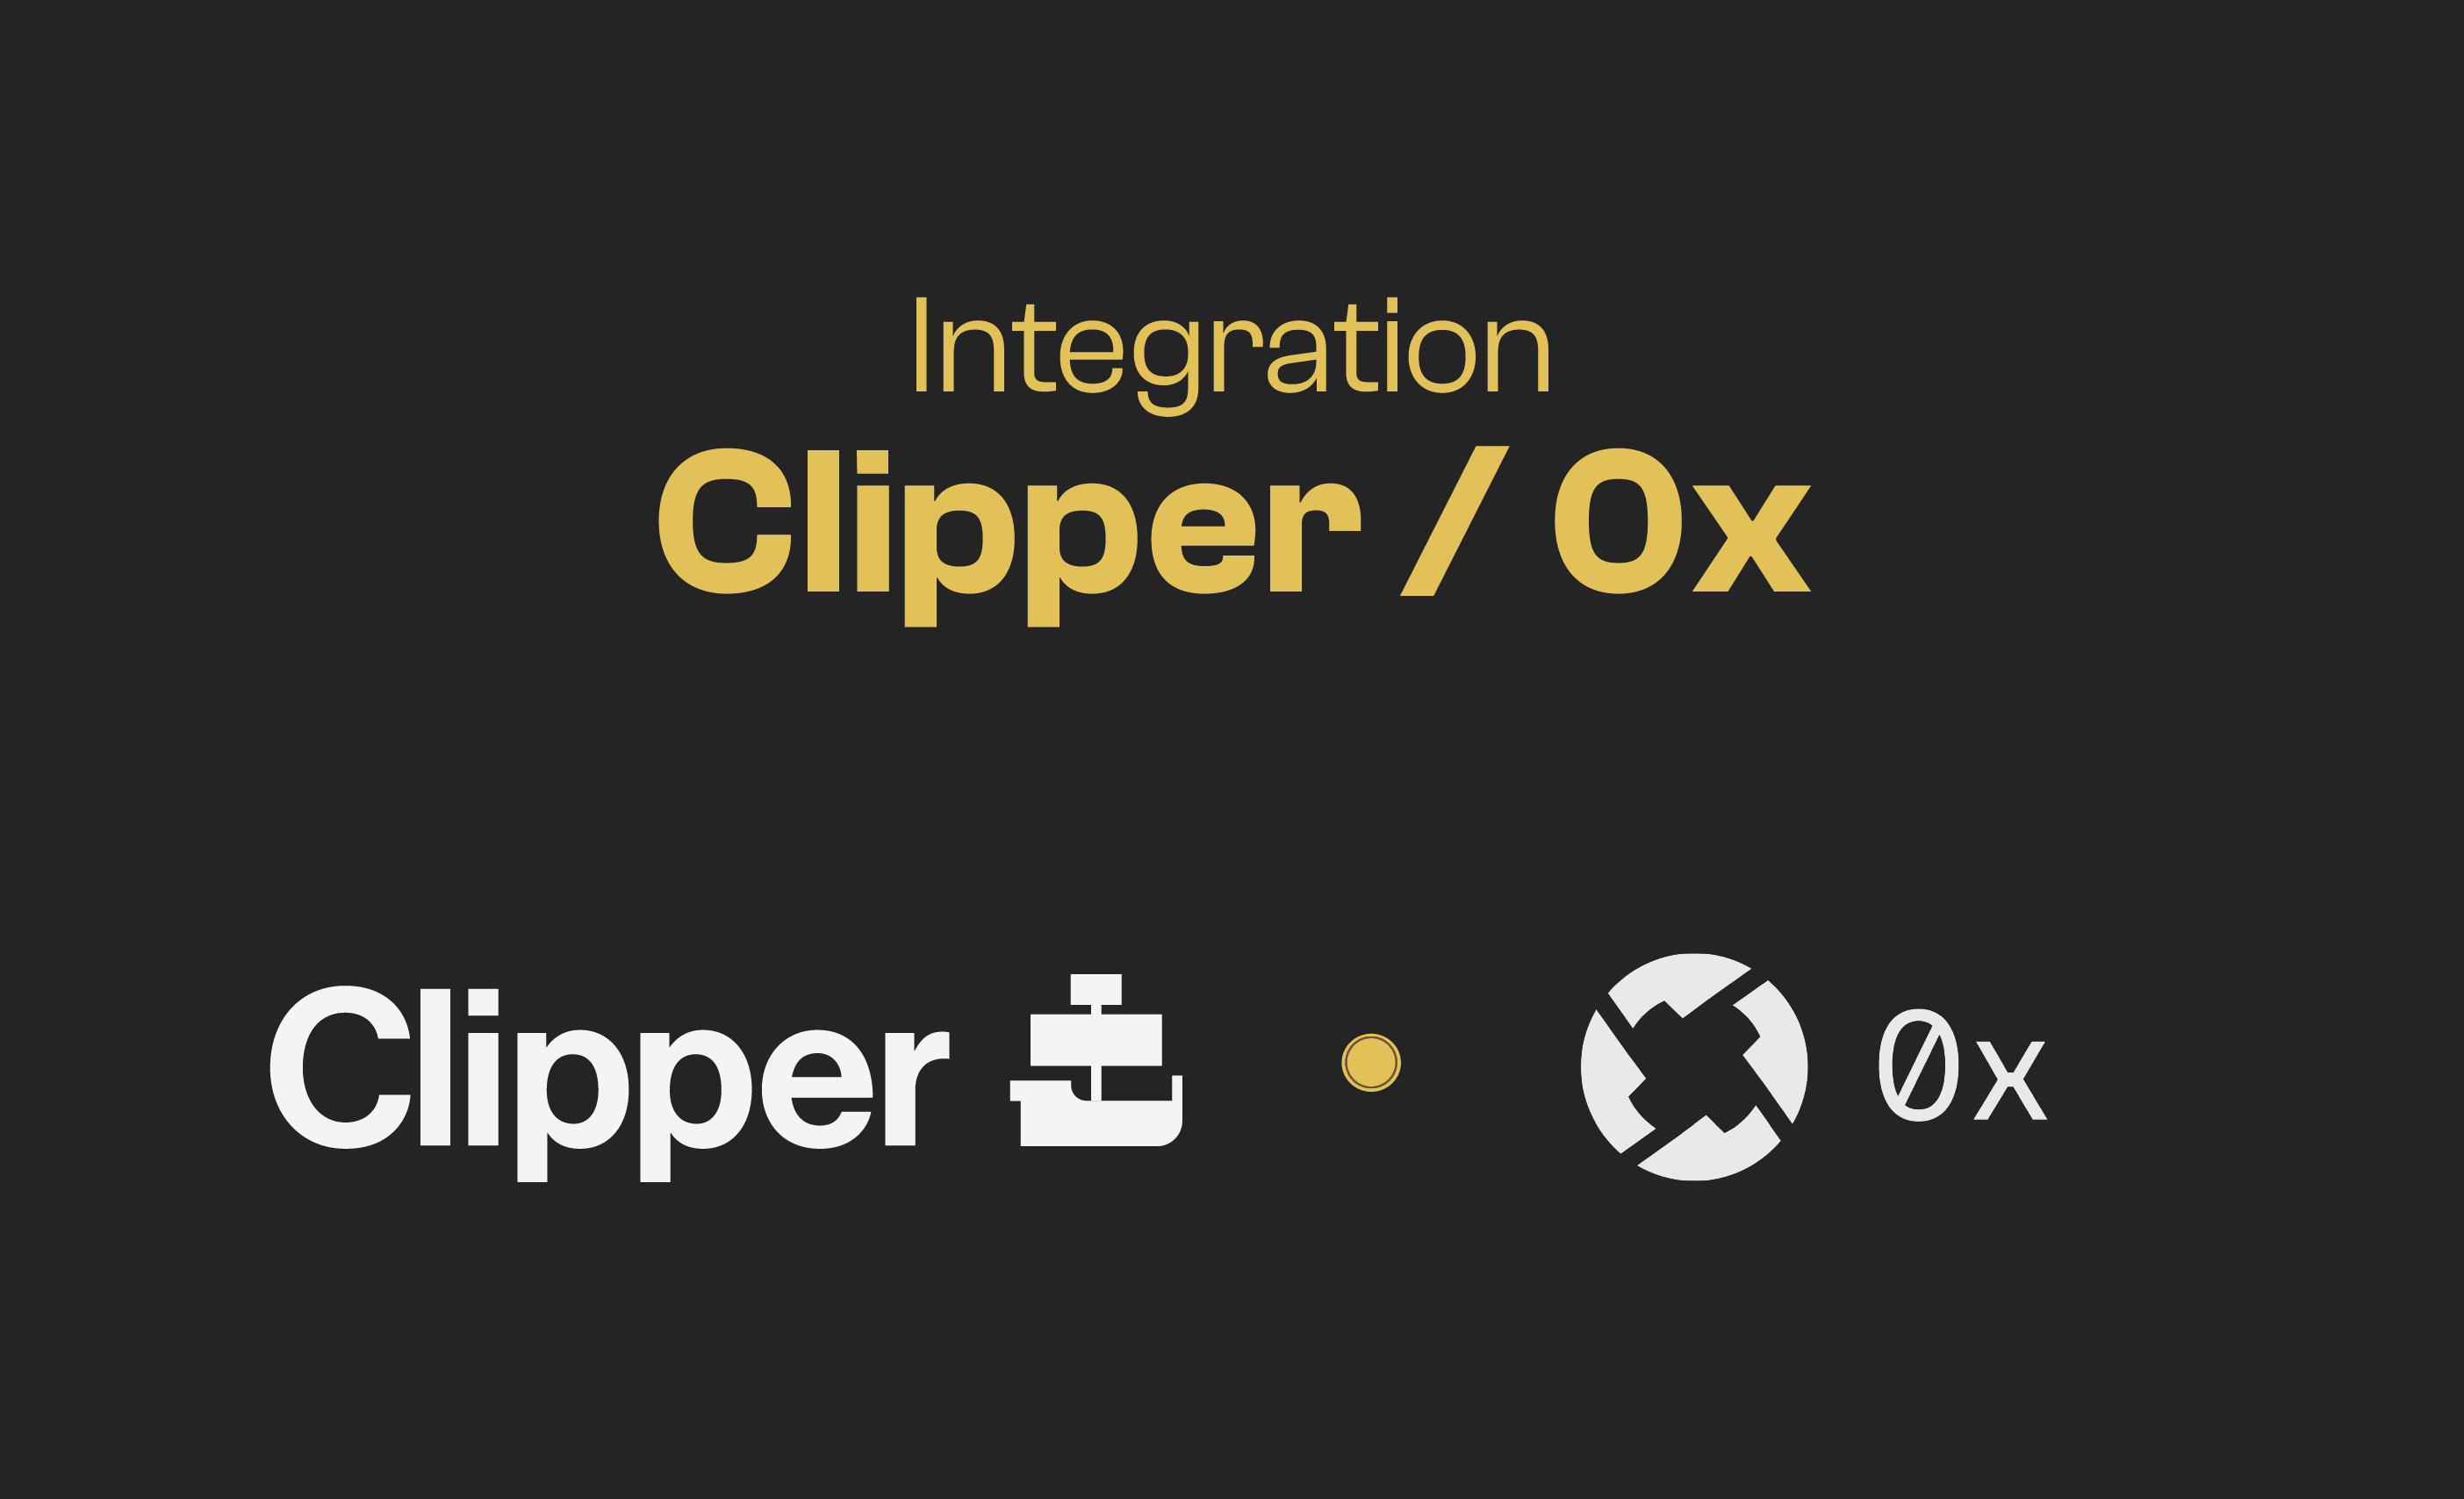 Clipper Integrates with 0x!